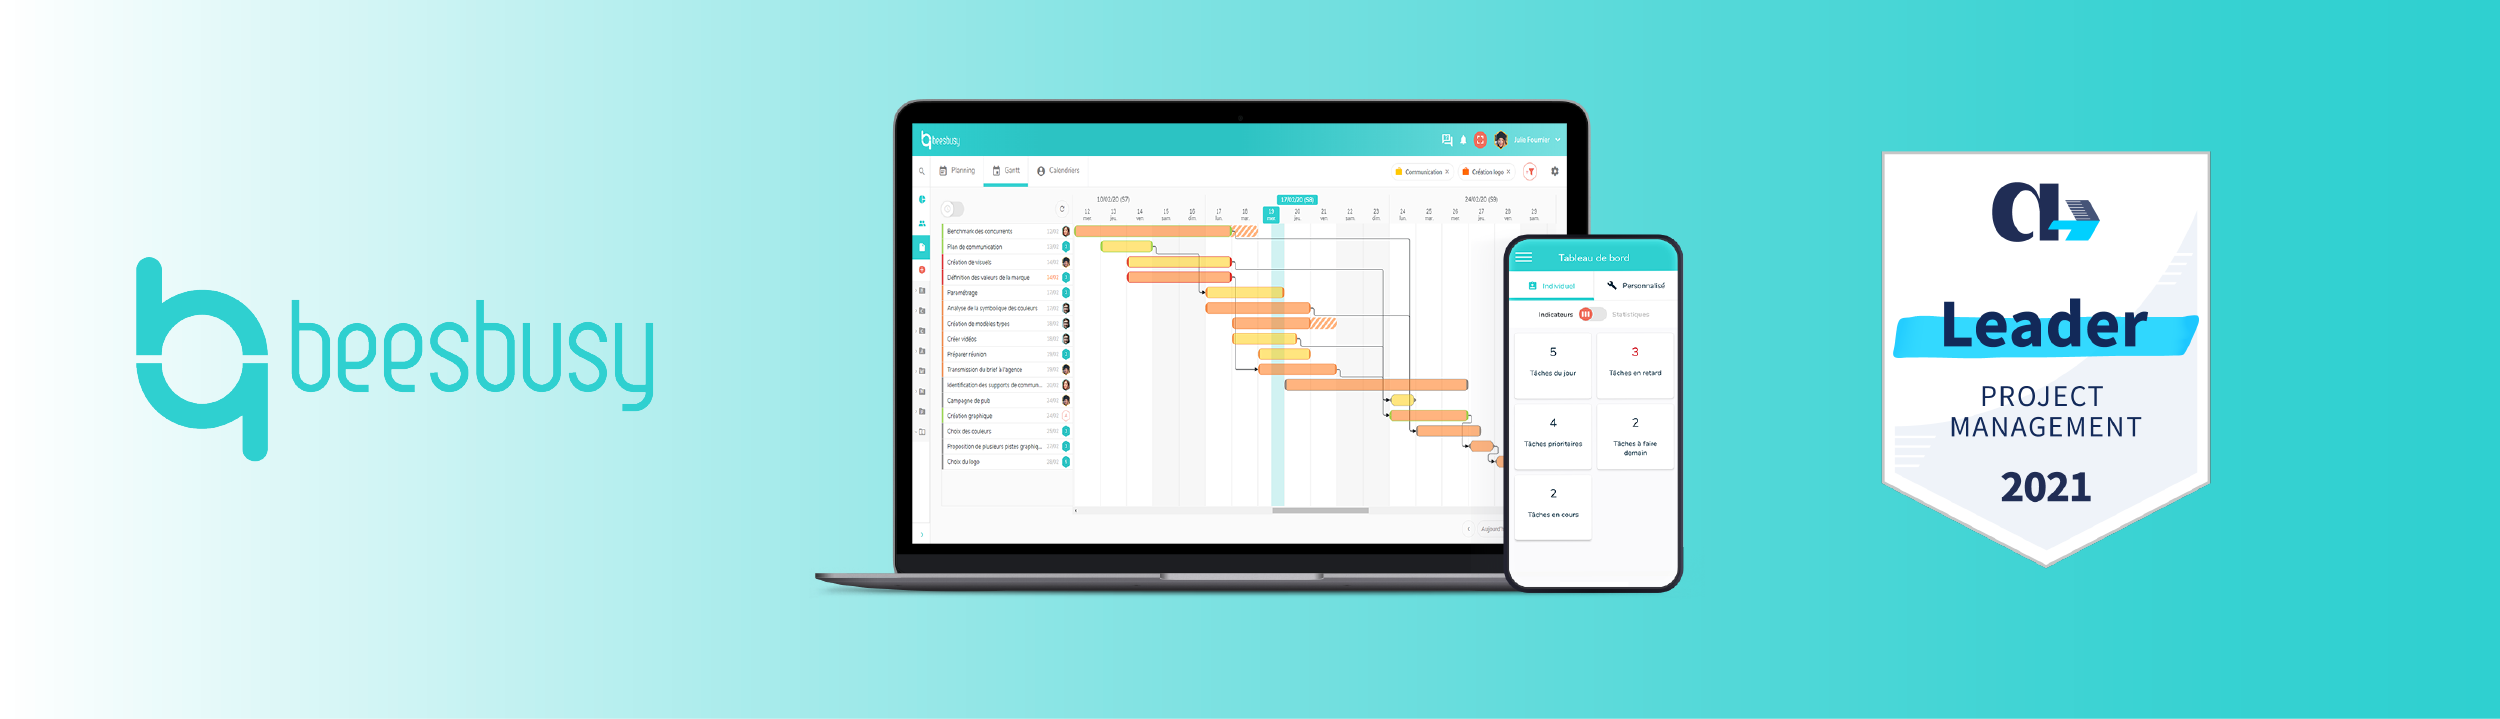 Review Beesbusy: An ideal tool for the planning of tasks and resources - Appvizer